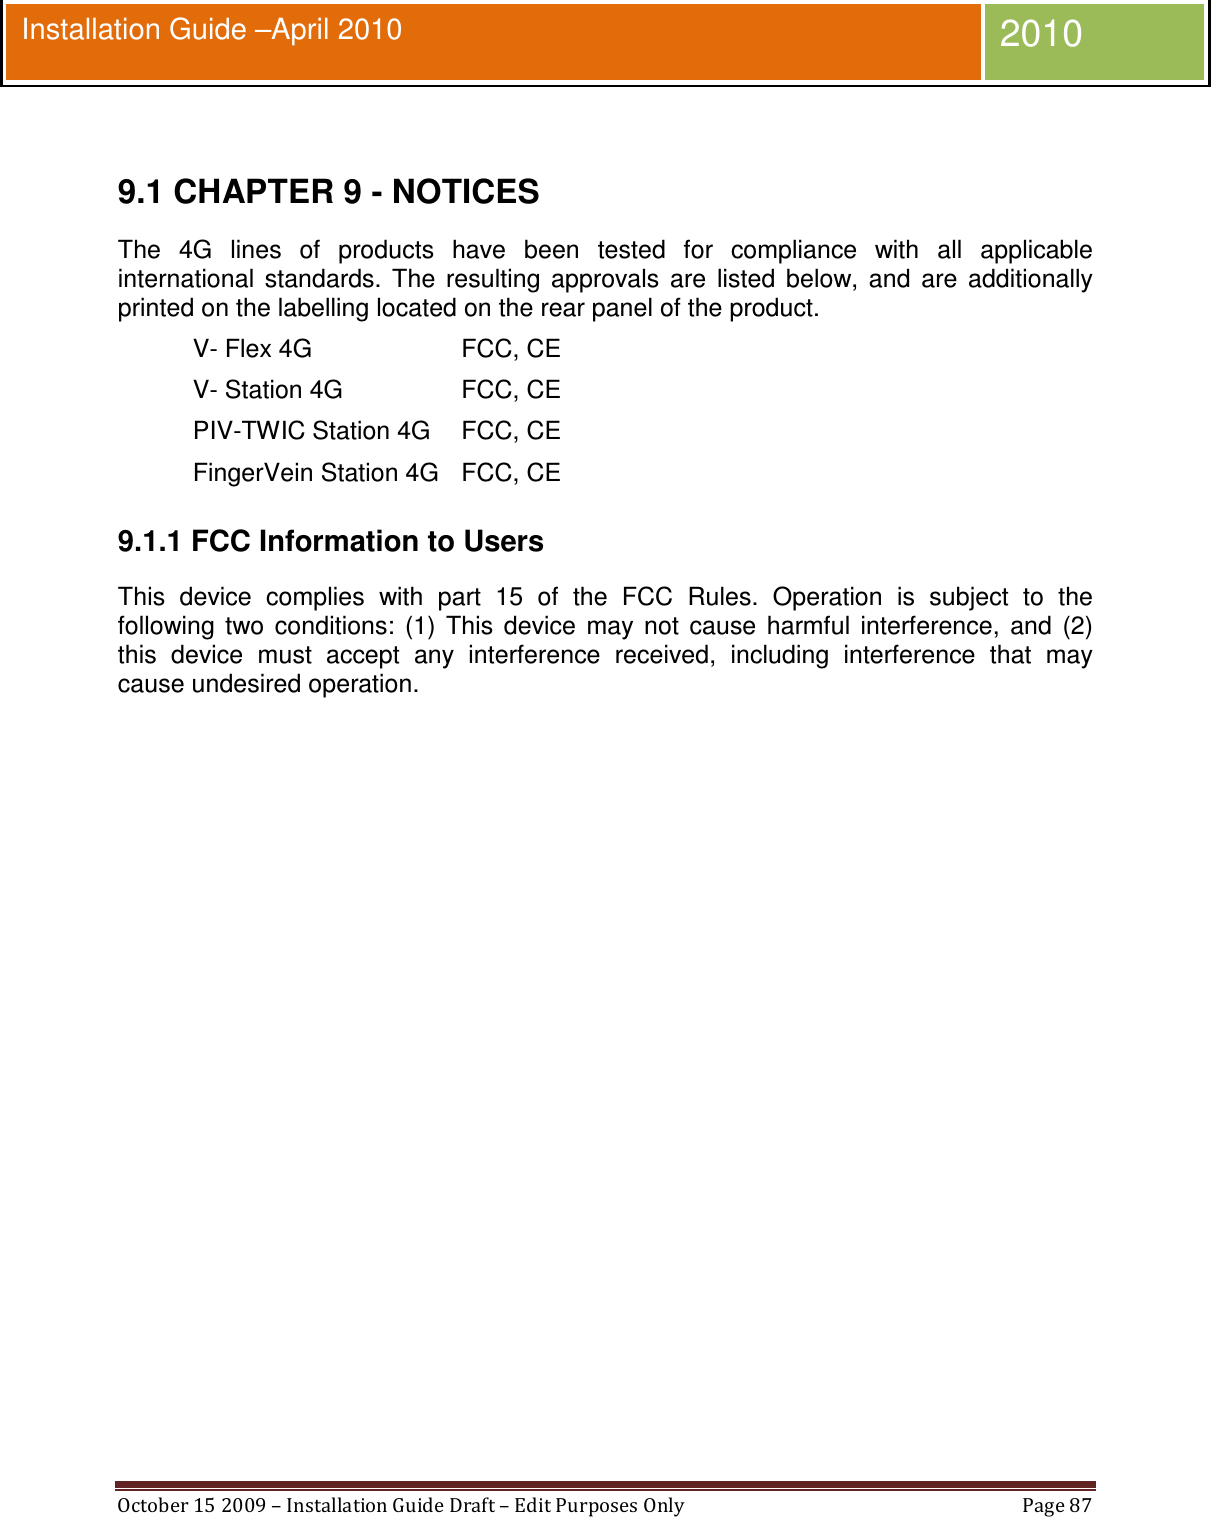  October 15 2009 – Installation Guide Draft – Edit Purposes Only  Page 87  Installation Guide –April 2010 2010  9.1 CHAPTER 9 - NOTICES The  4G  lines  of  products  have  been  tested  for  compliance  with  all  applicable international  standards.  The  resulting  approvals  are  listed  below,  and  are  additionally printed on the labelling located on the rear panel of the product. V- Flex 4G  FCC, CE V- Station 4G  FCC, CE PIV-TWIC Station 4G  FCC, CE FingerVein Station 4G FCC, CE 9.1.1 FCC Information to Users This  device  complies  with  part  15  of  the  FCC  Rules.  Operation  is  subject  to  the following  two  conditions:  (1)  This  device  may  not  cause  harmful  interference,  and  (2) this  device  must  accept  any  interference  received,  including  interference  that  may cause undesired operation. 